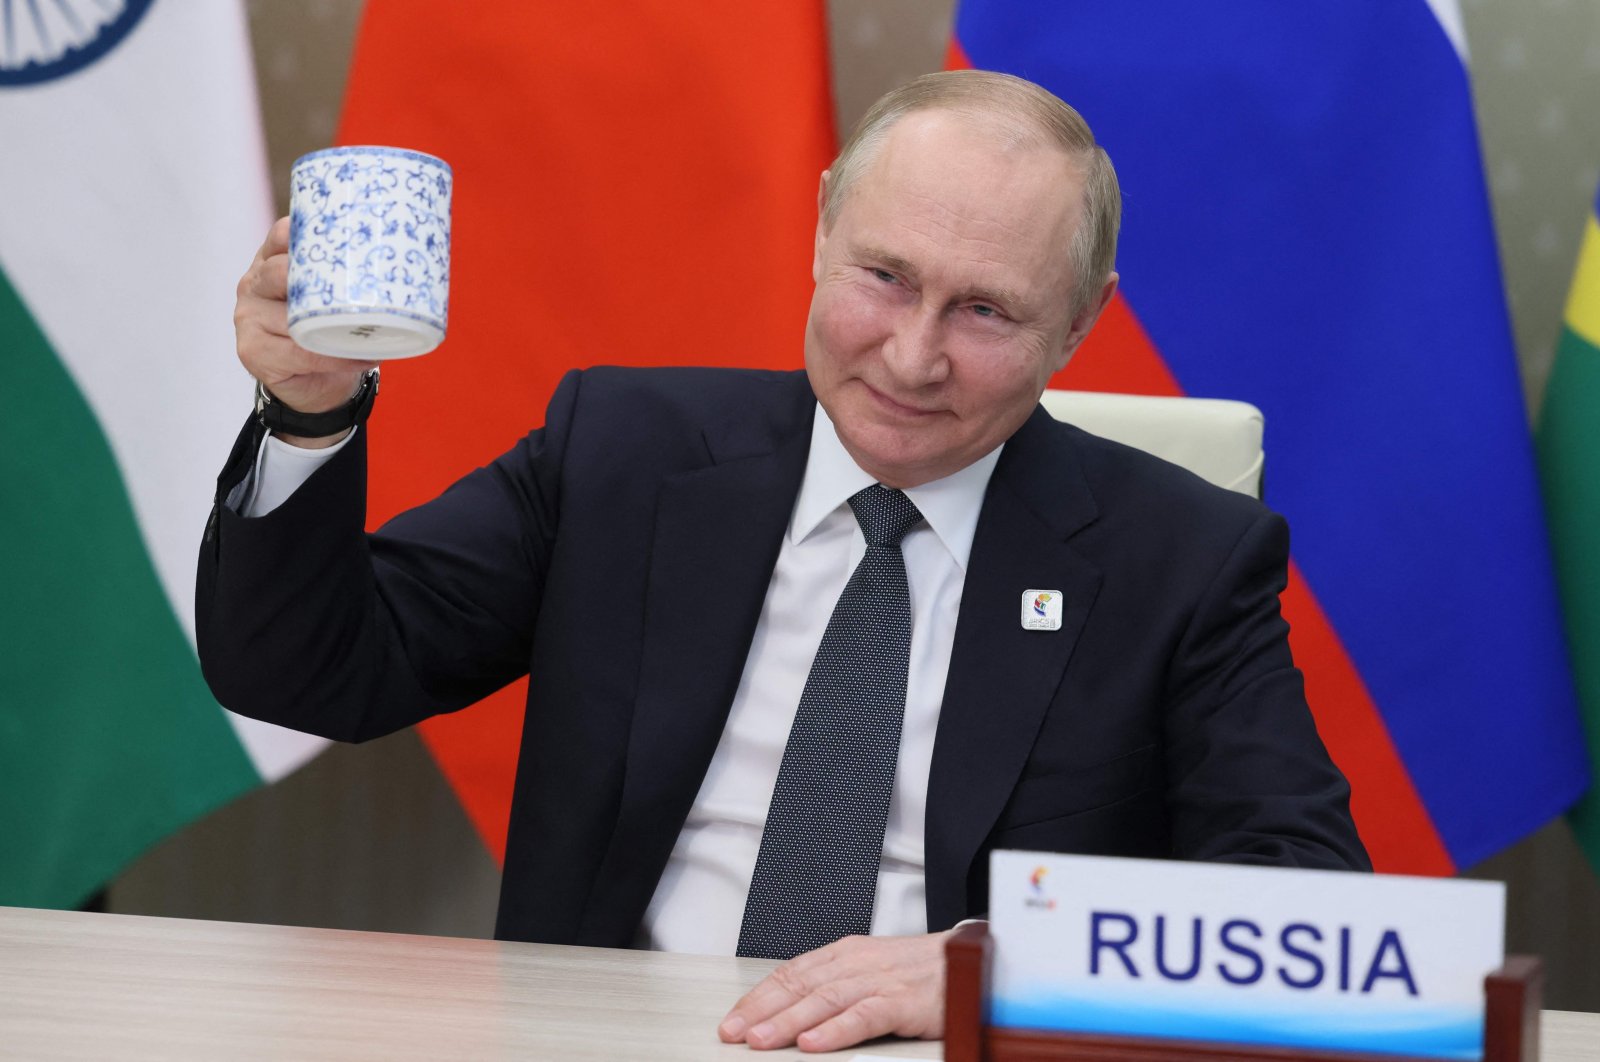 Russian President Vladimir Putin makes a toast as he takes part in the XIV BRICS summit in virtual format, Moscow, Russia, June 23, 2022. (AFP Photo)